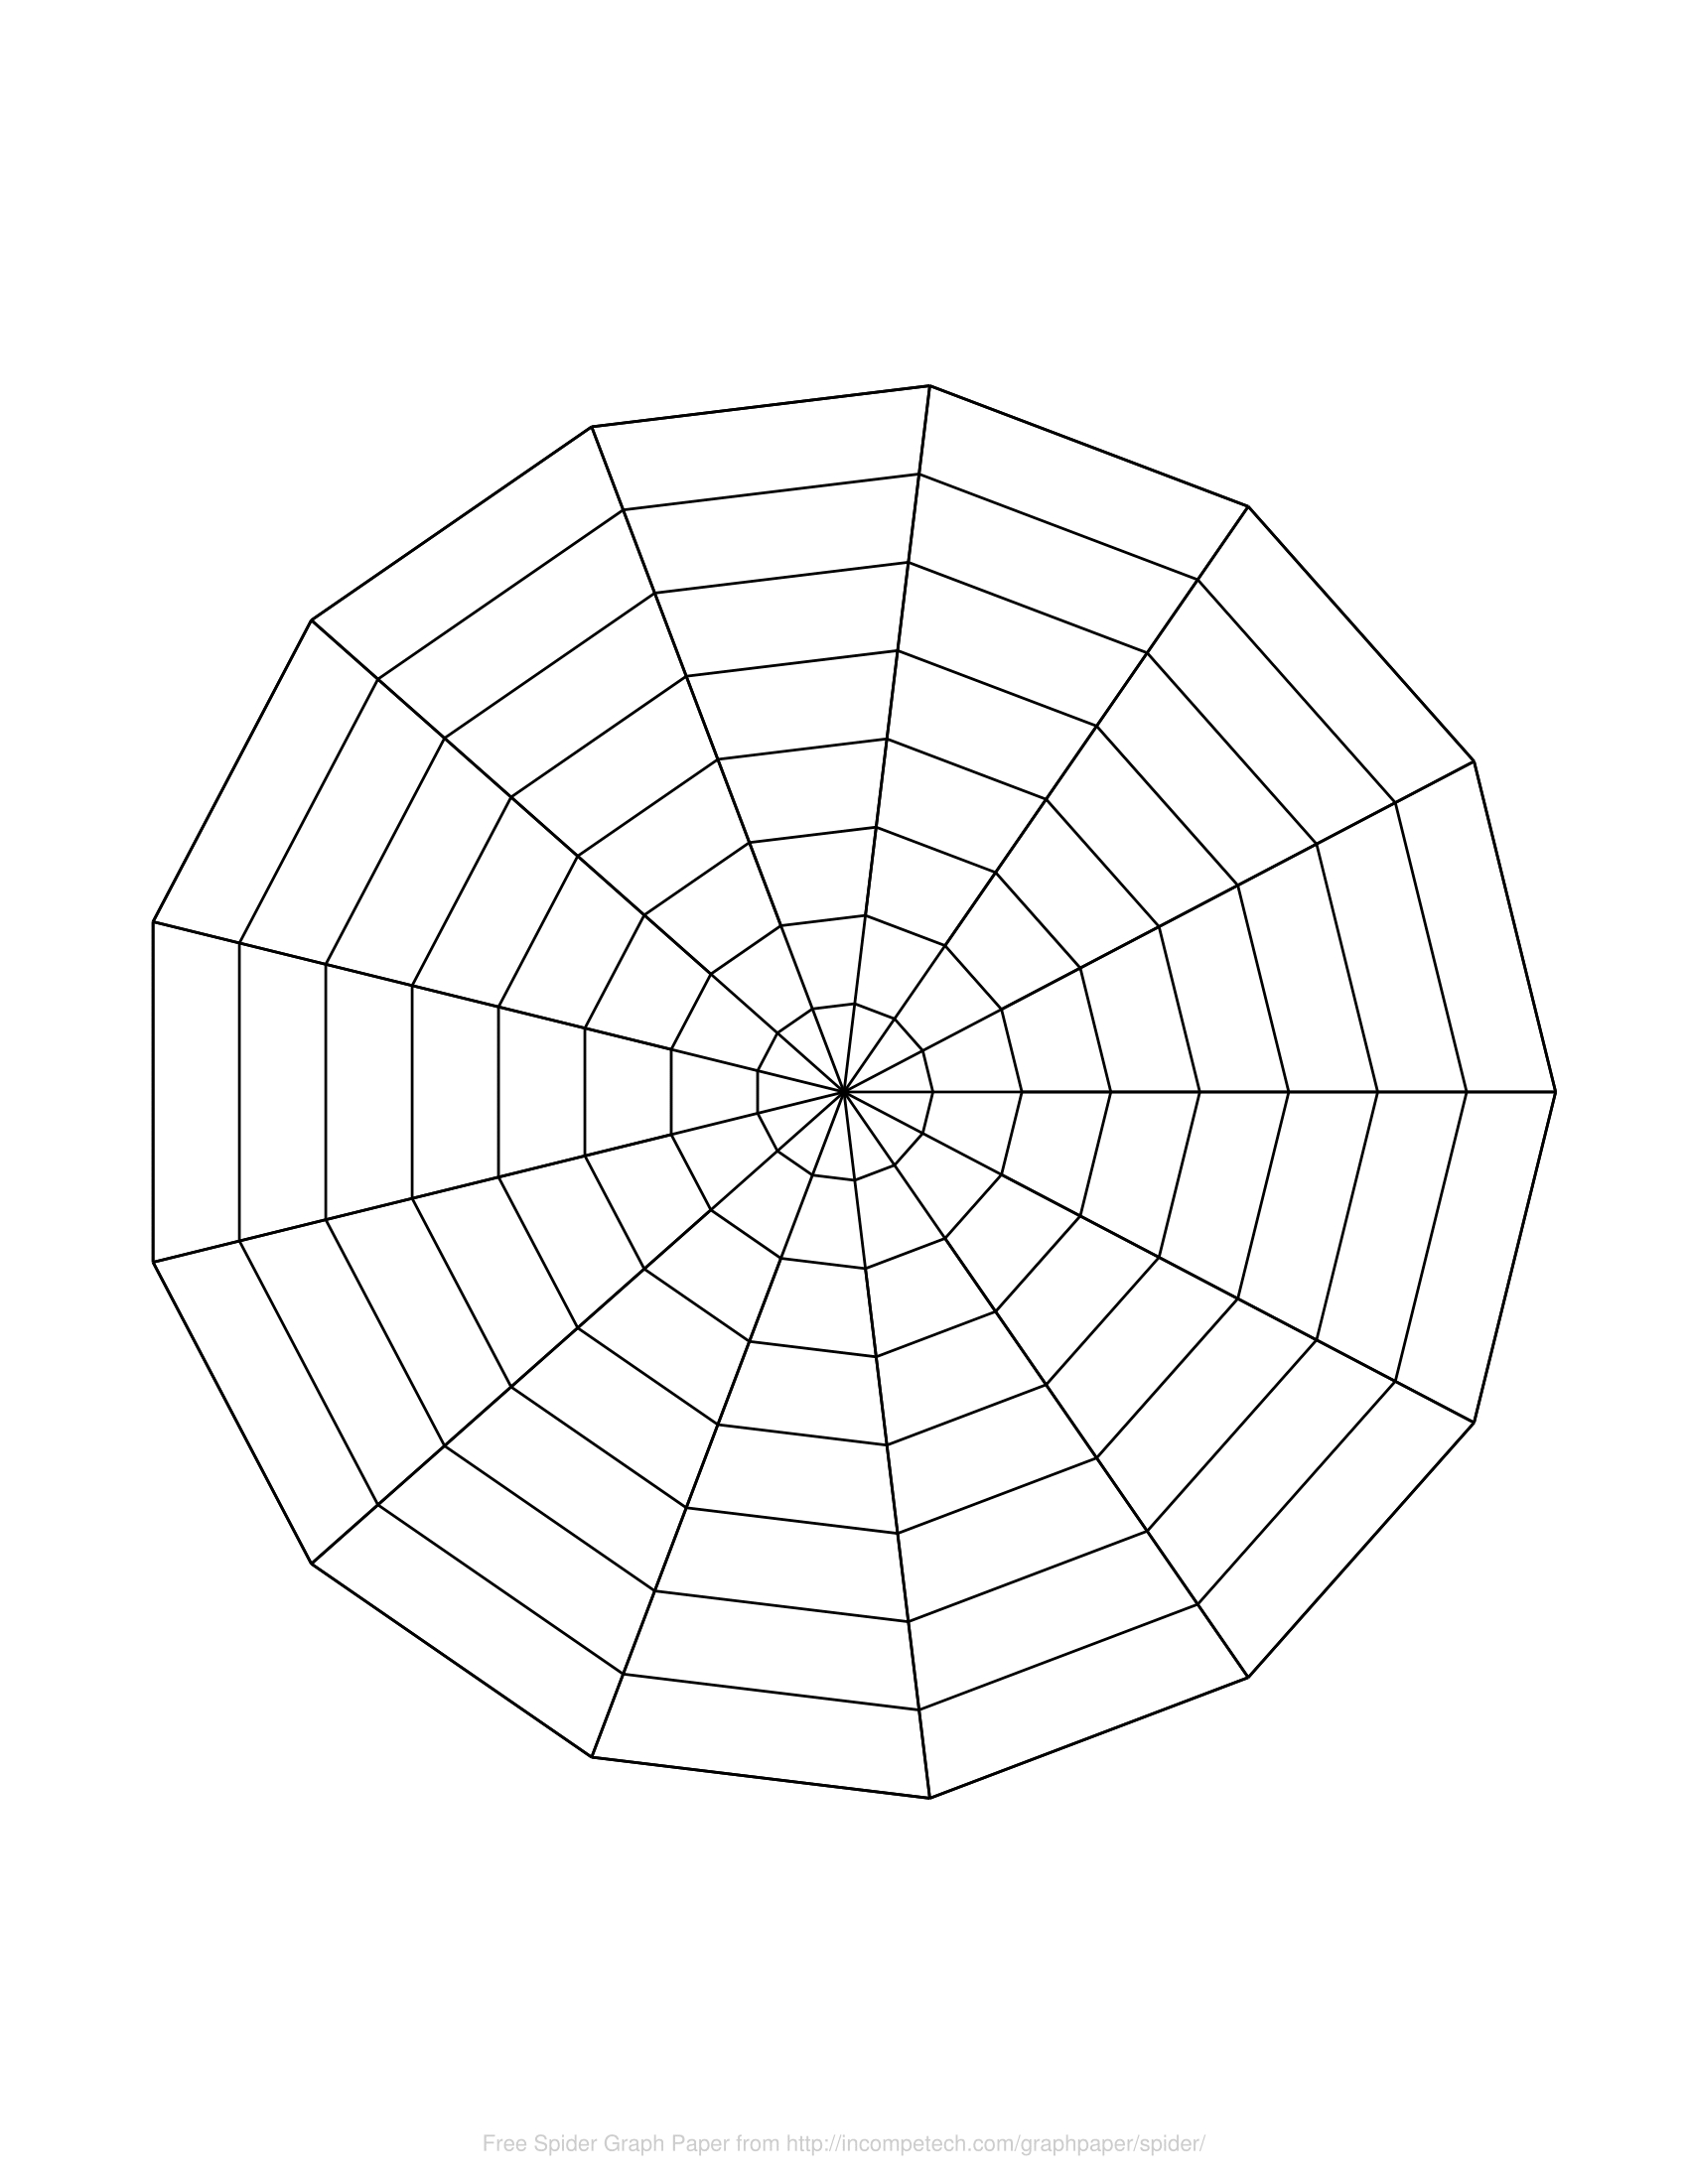 Free Online Graph Paper / Spider With Regard To Blank Radar Chart Template